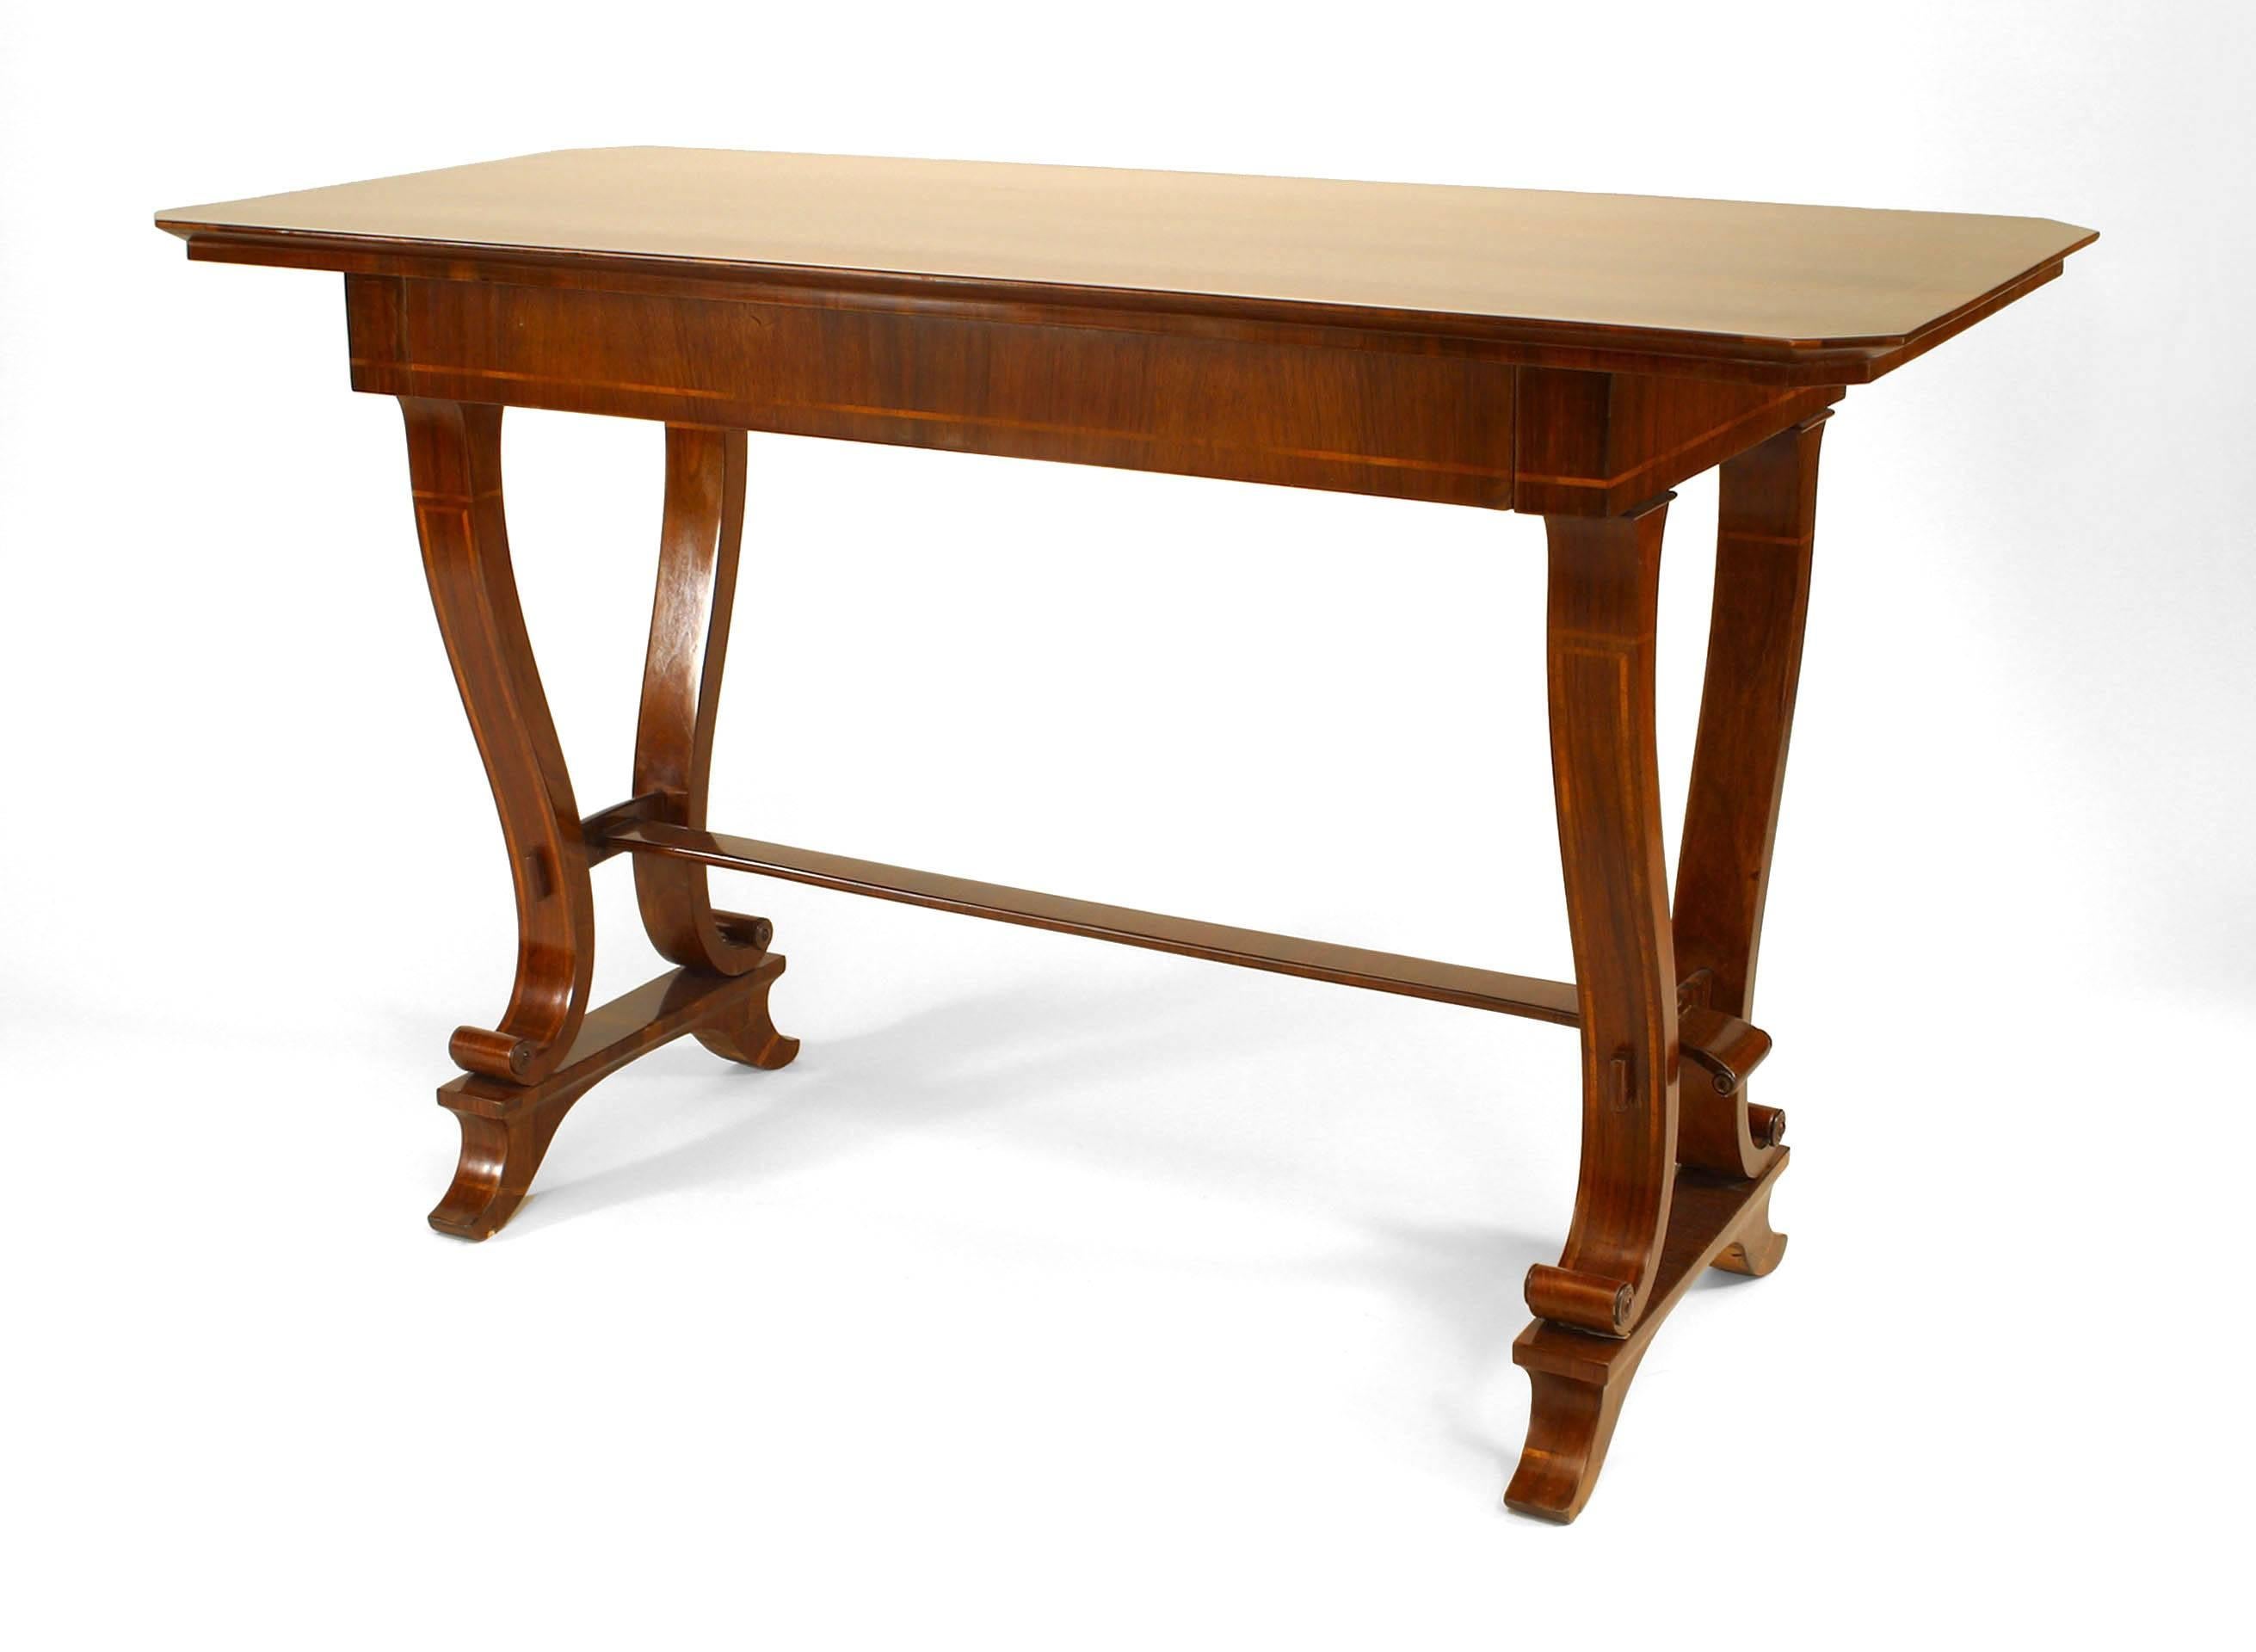 Austrian Biedermeier (Circa 1825) walnut and inlaid trimmed davenport table desk with single drawer and stretcher with double pedestal base supports.
